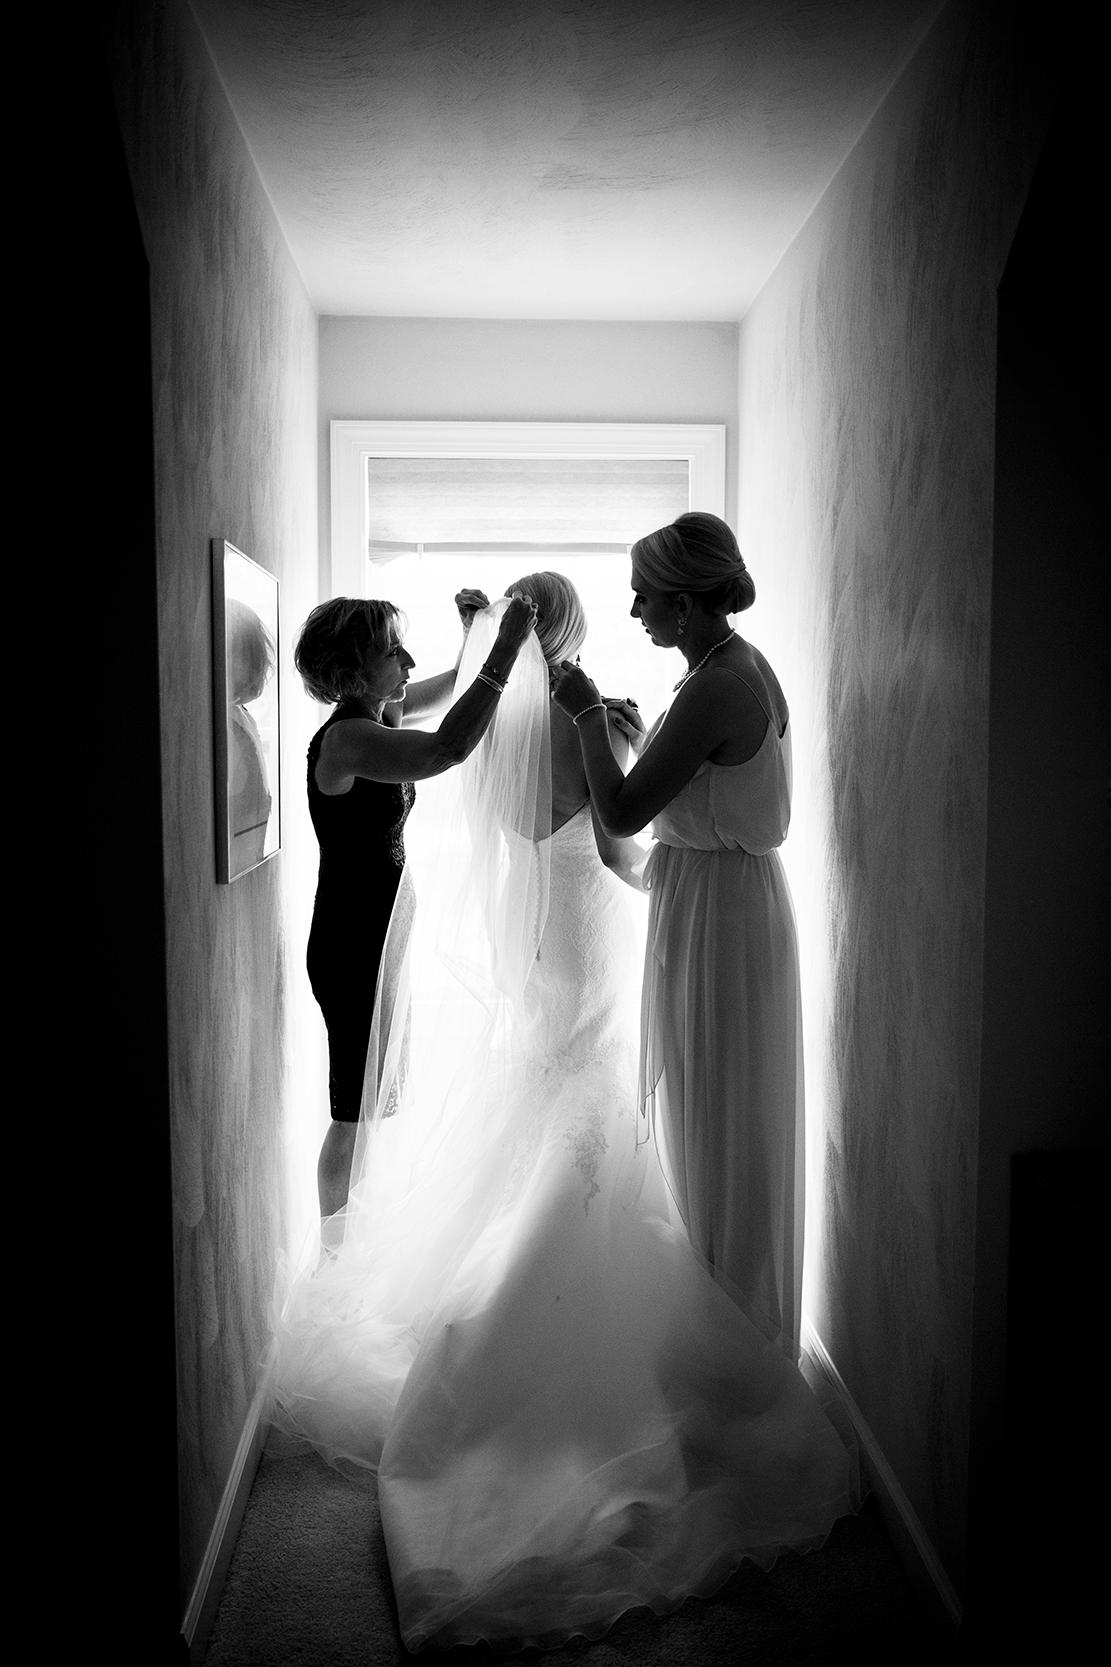 Why Getting Ready Photos on Your Wedding Day Matter - Image Property of www.j-dphoto.com